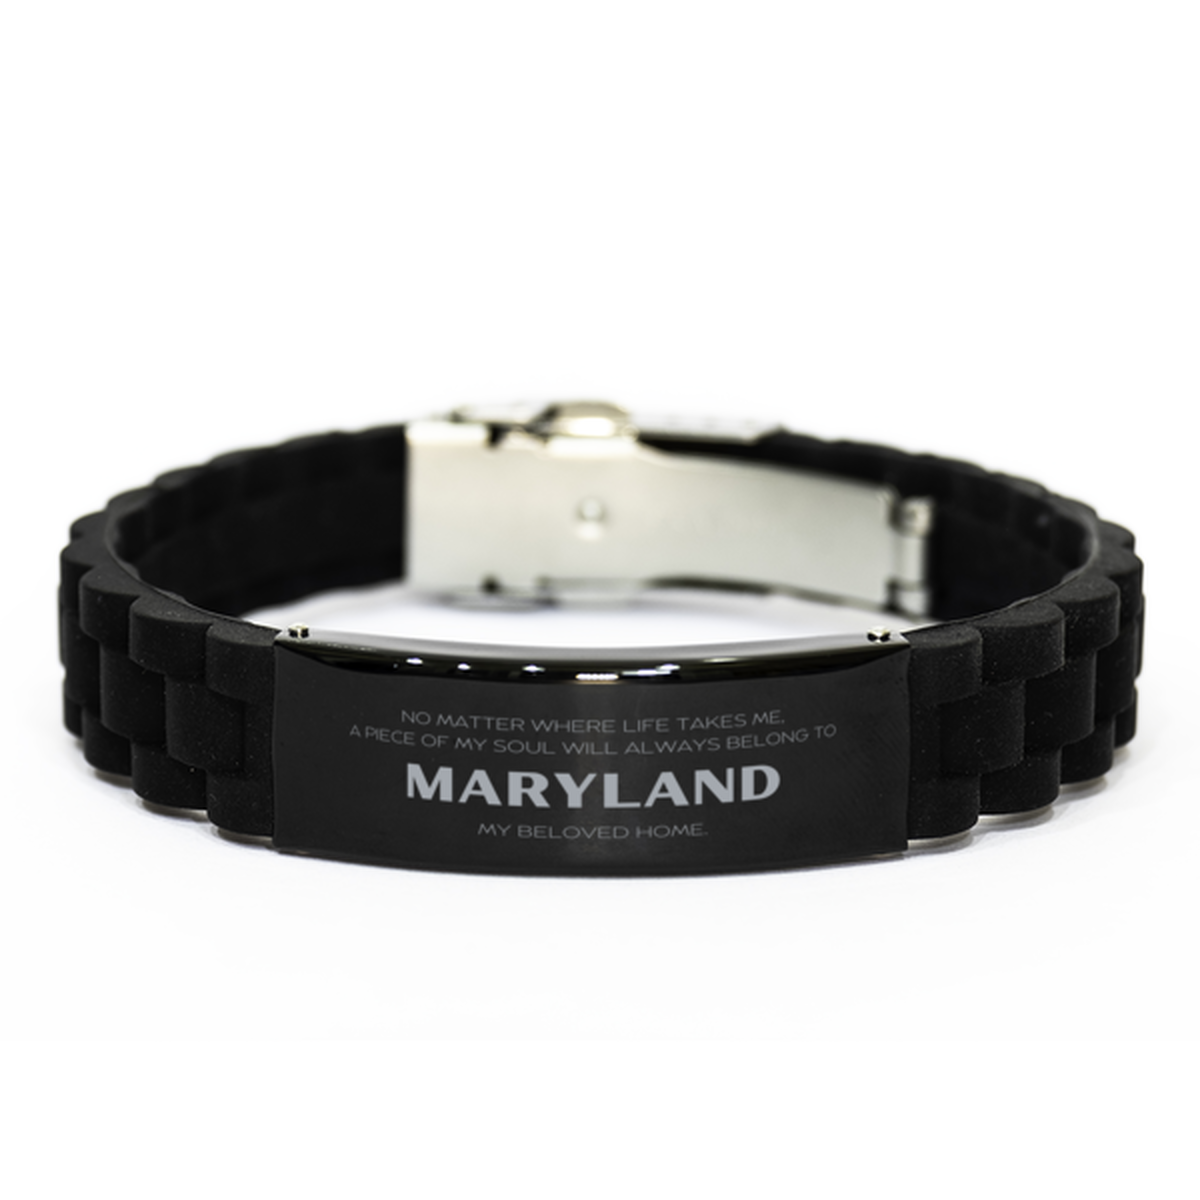 Love Maryland State Gifts, My soul will always belong to Maryland, Proud Black Glidelock Clasp Bracelet, Birthday Unique Gifts For Maryland Men, Women, Friends